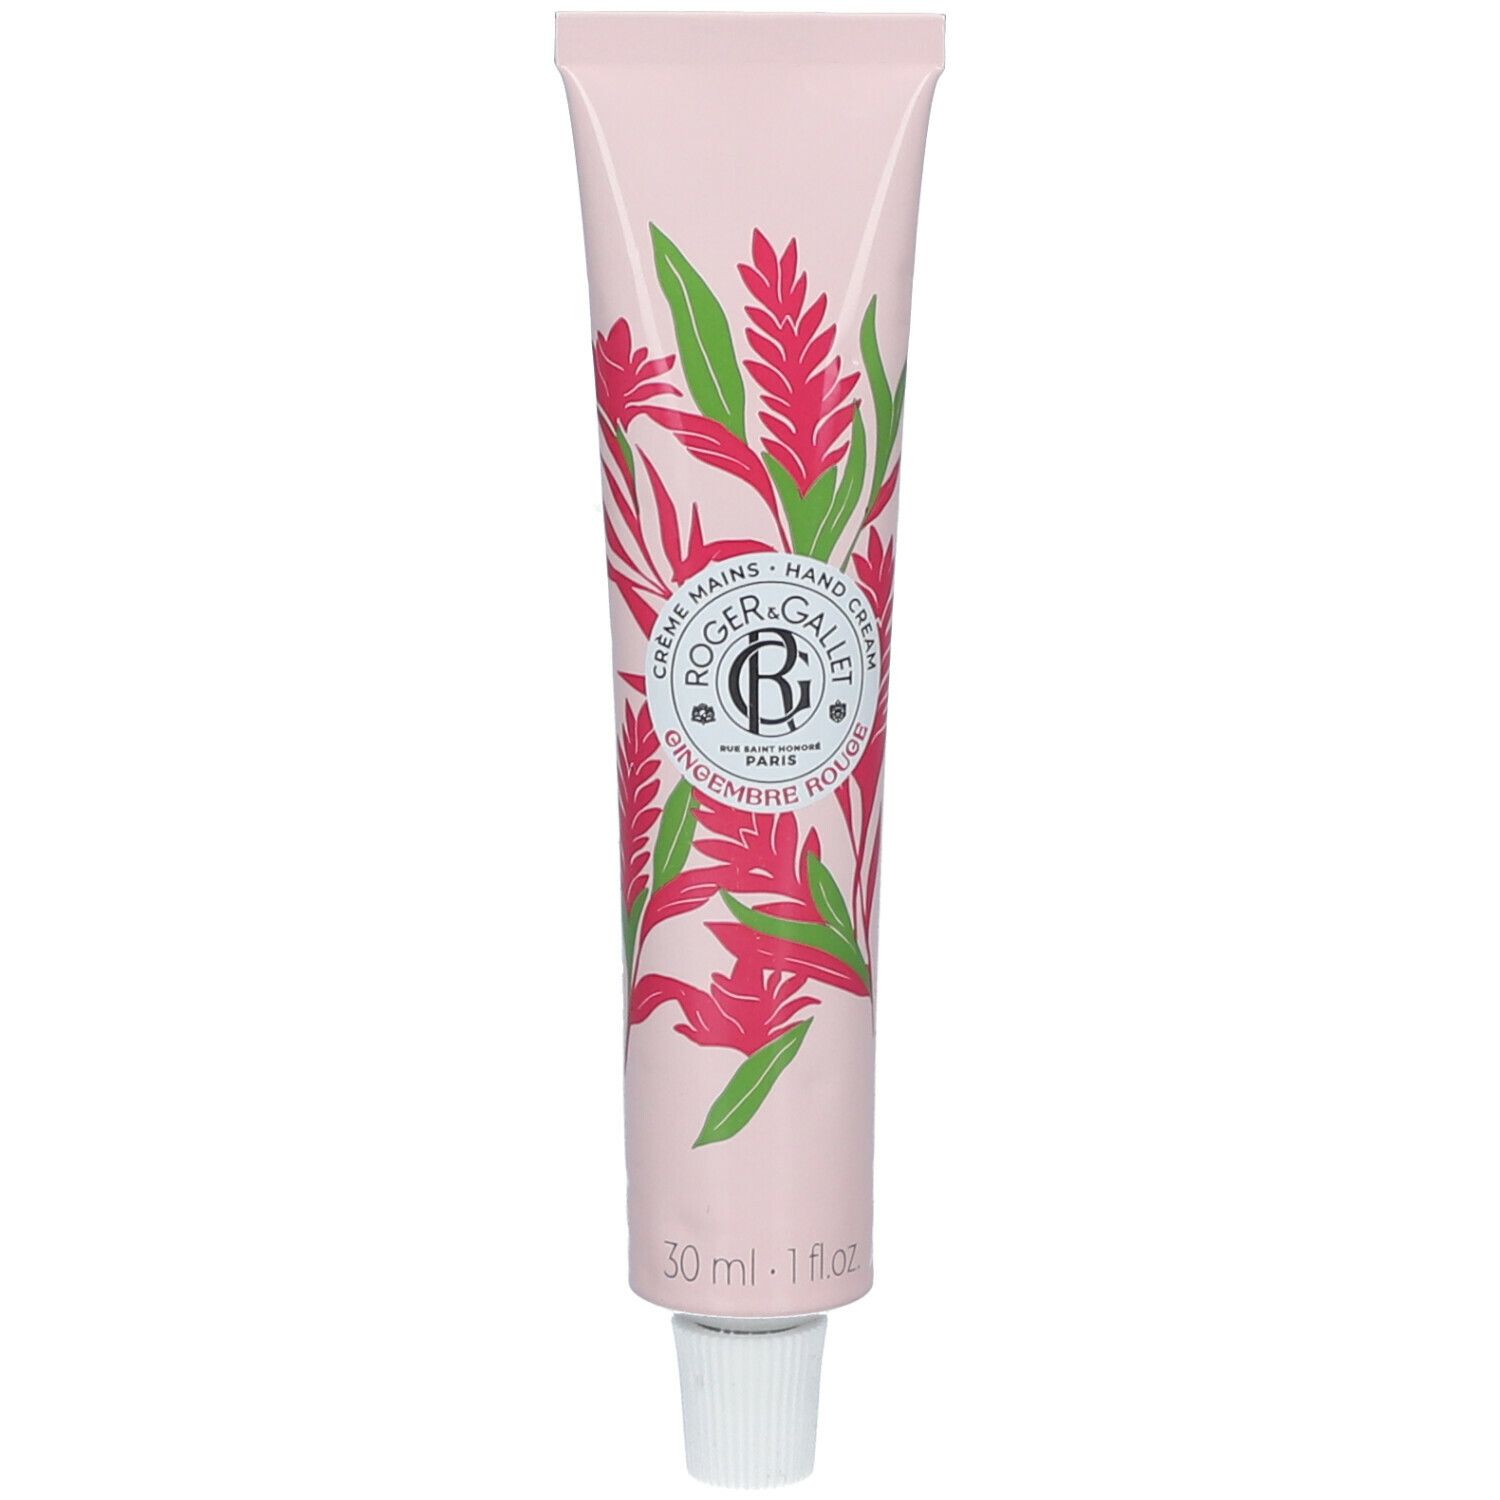 ROGER & GALLET GINGEMBRE ROUGE HAND CREAM